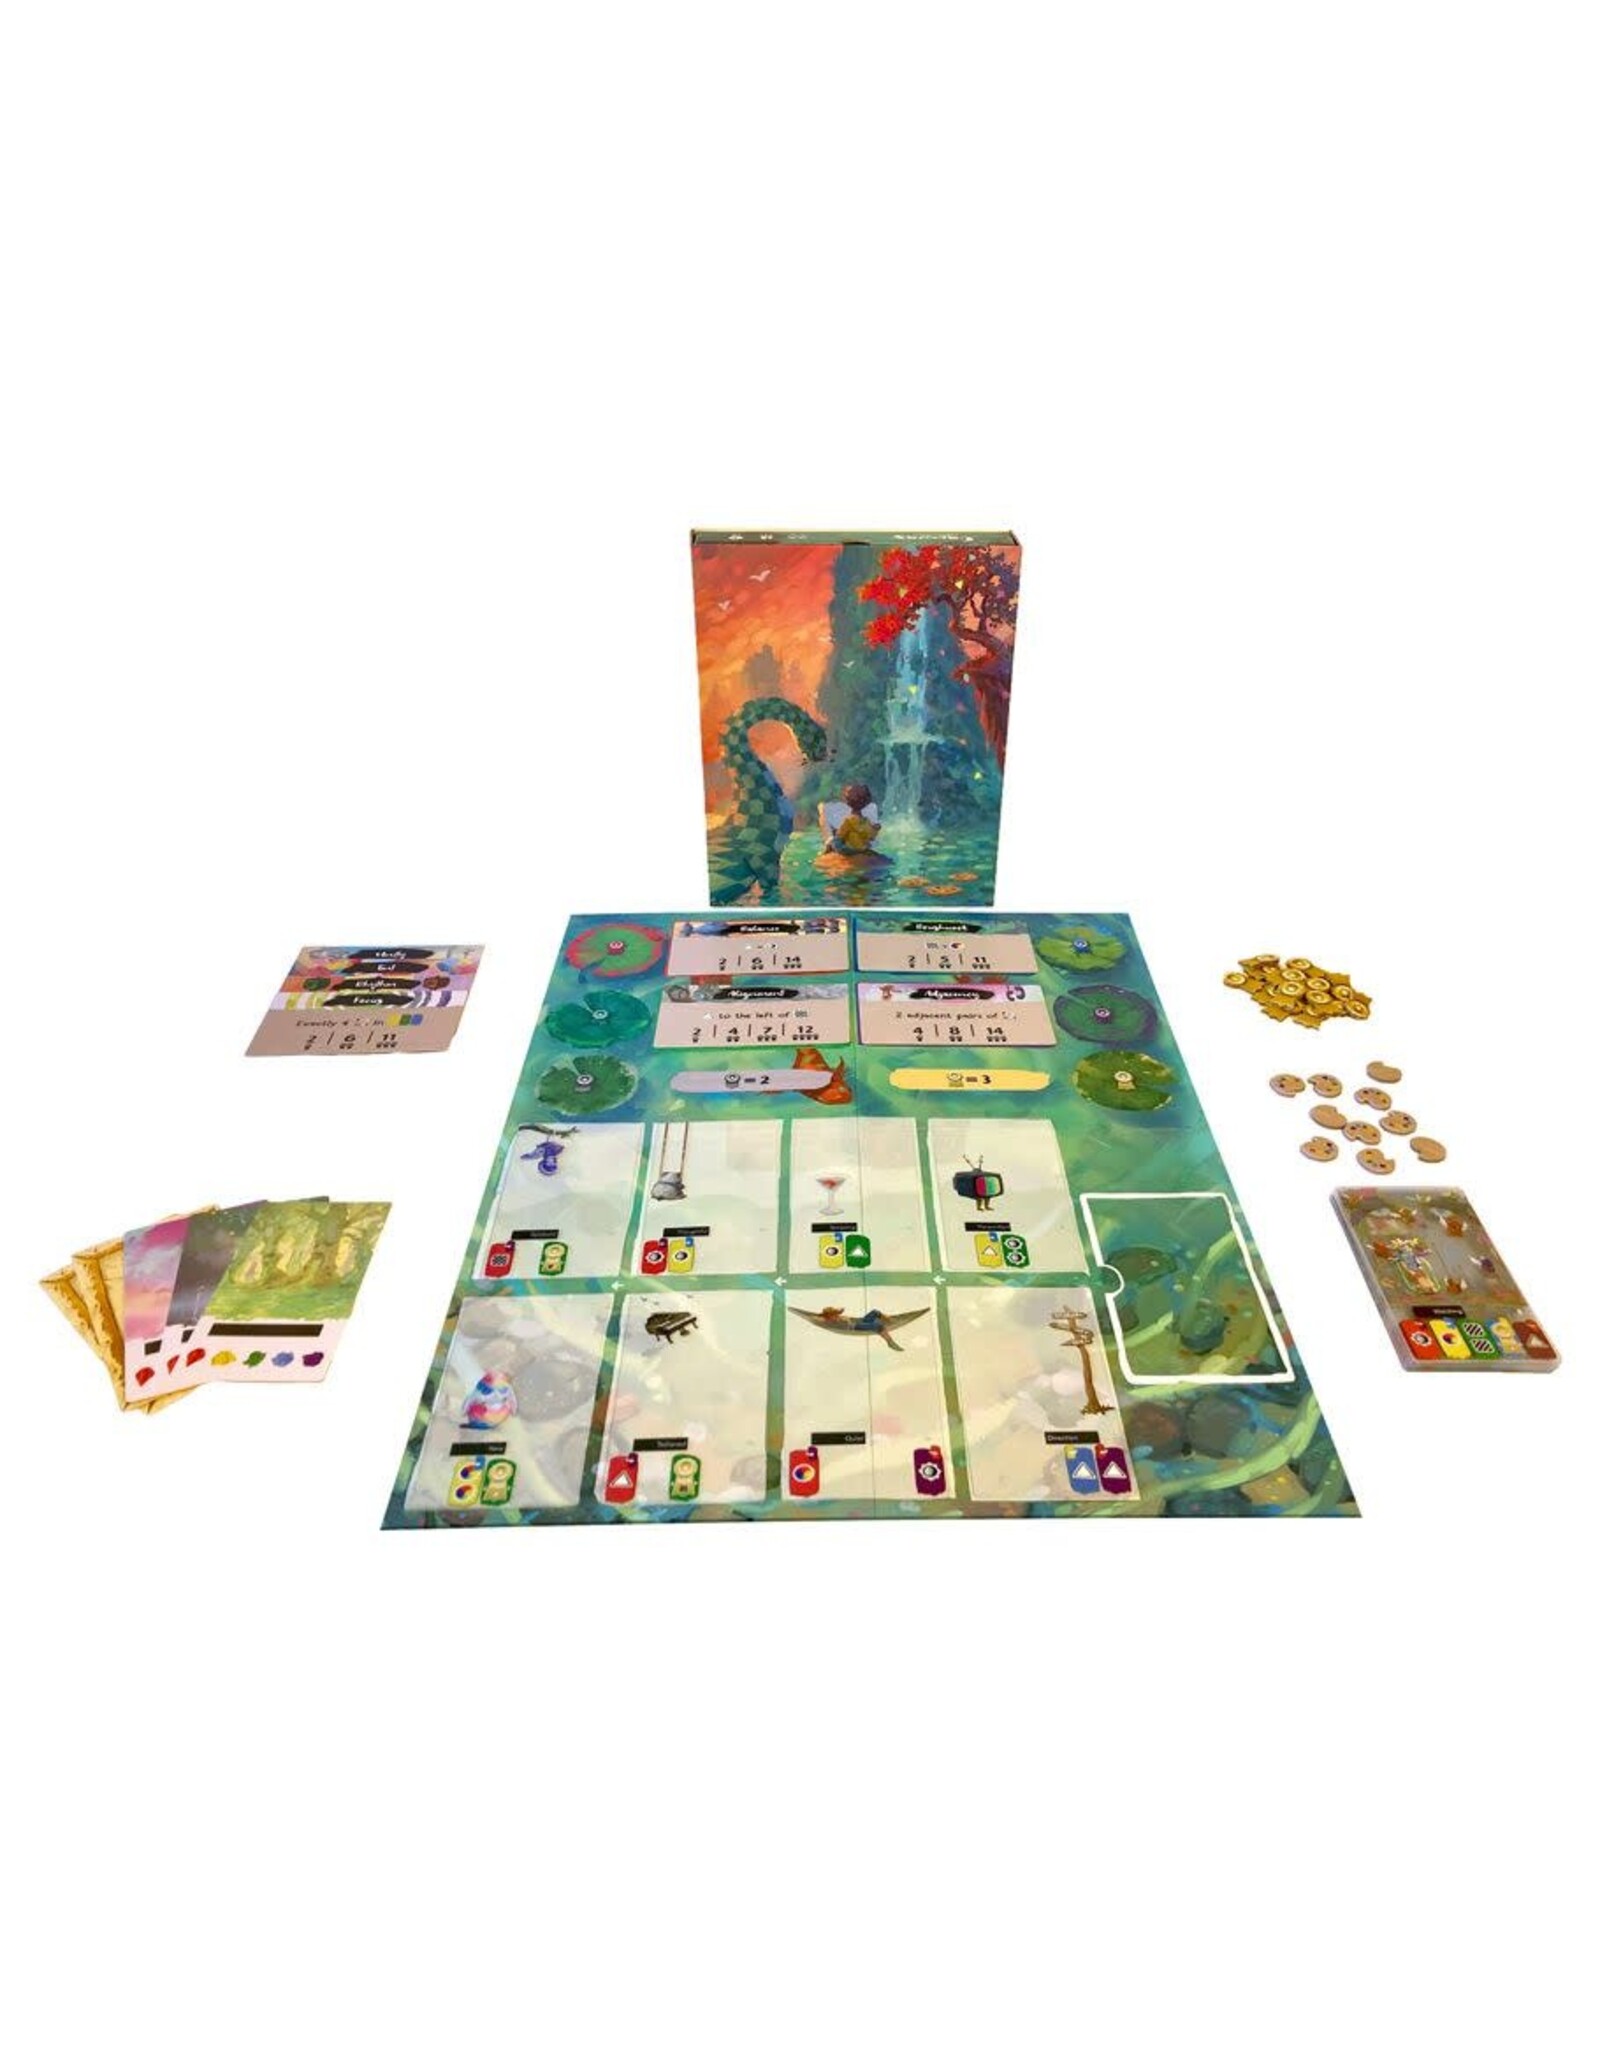 Asmodee Canvas: Reflections Expansion